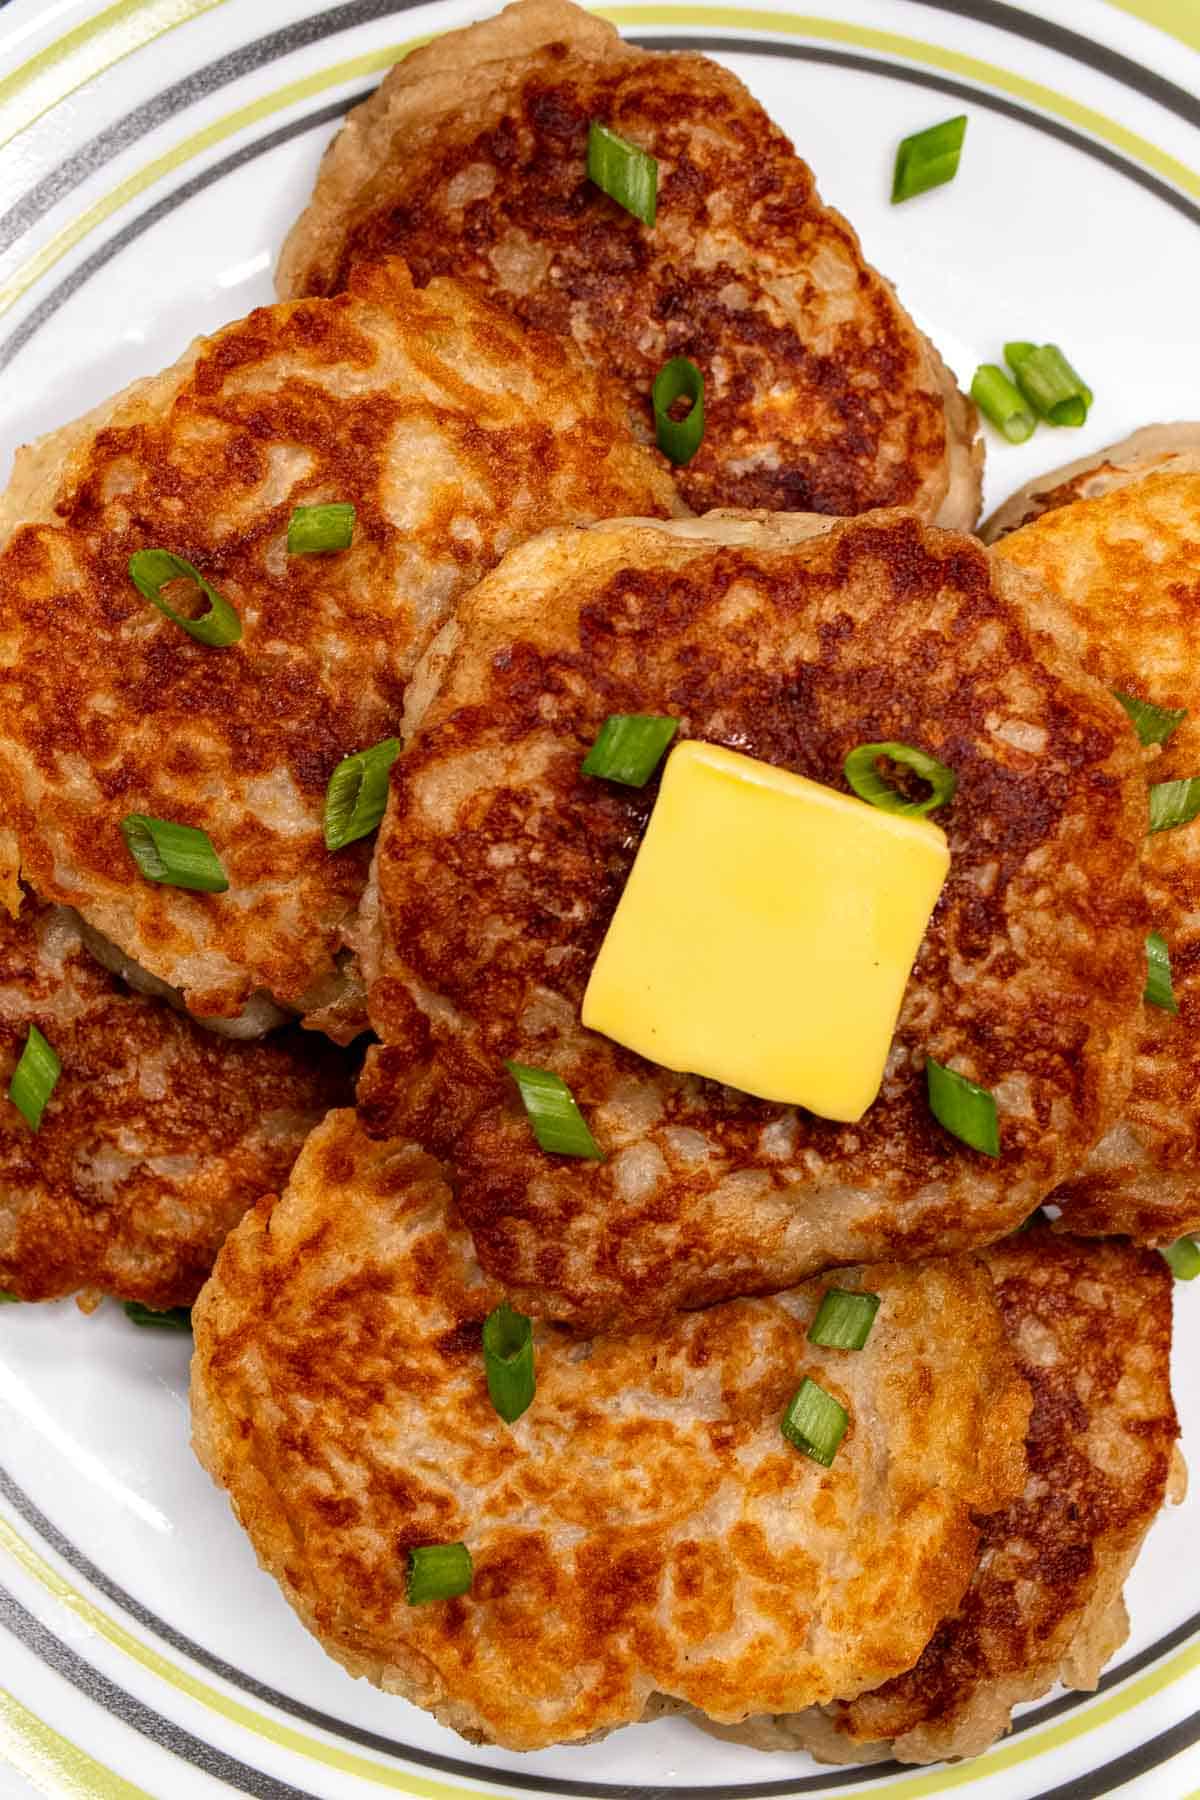 Overhead view of Irish boxty on a plate topped with Irish butter and scallions.